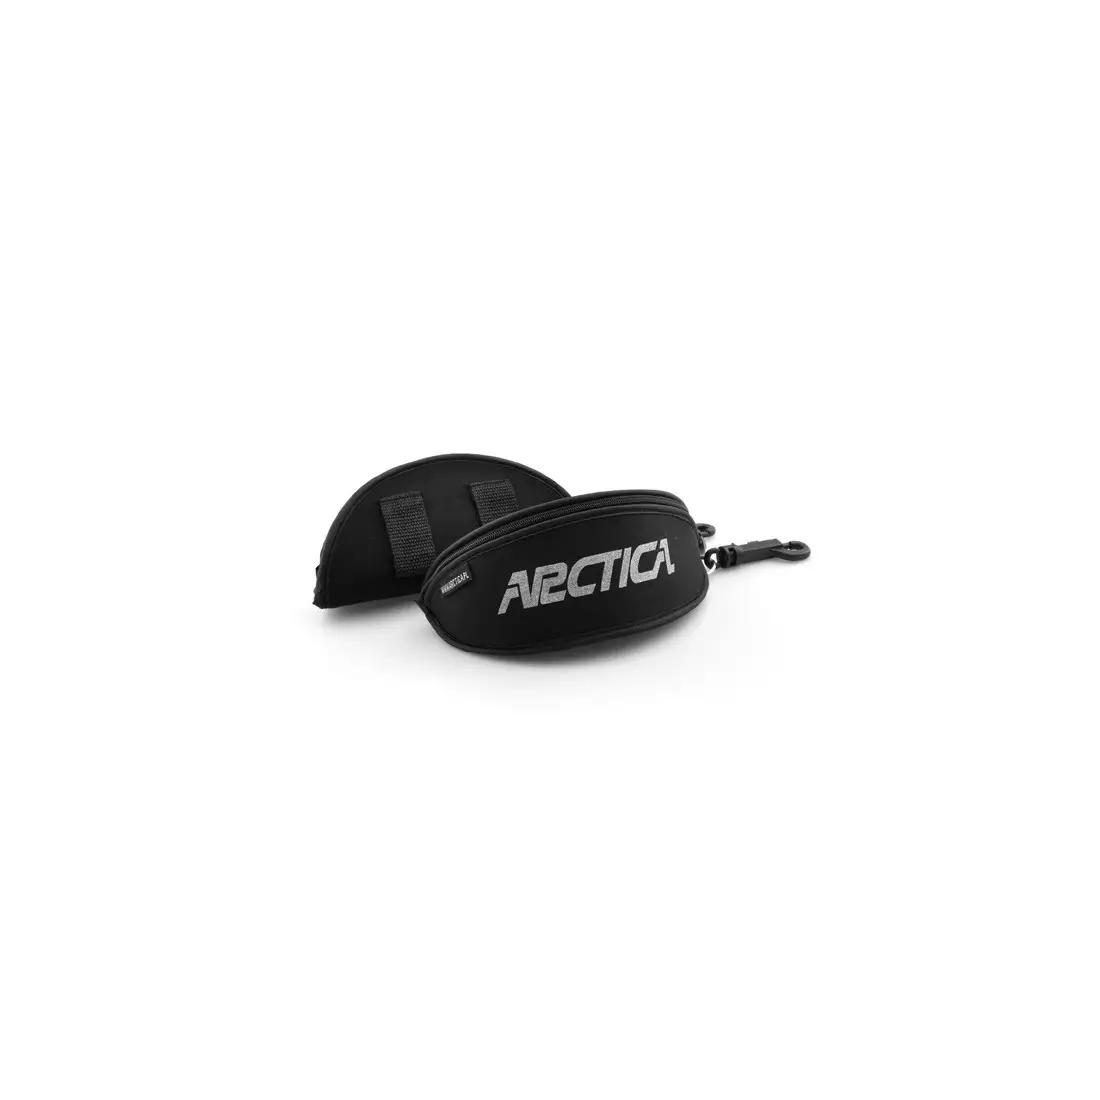 Cycling / sports glasses ARCTICA S 312A Replaceable lenses, Polarization